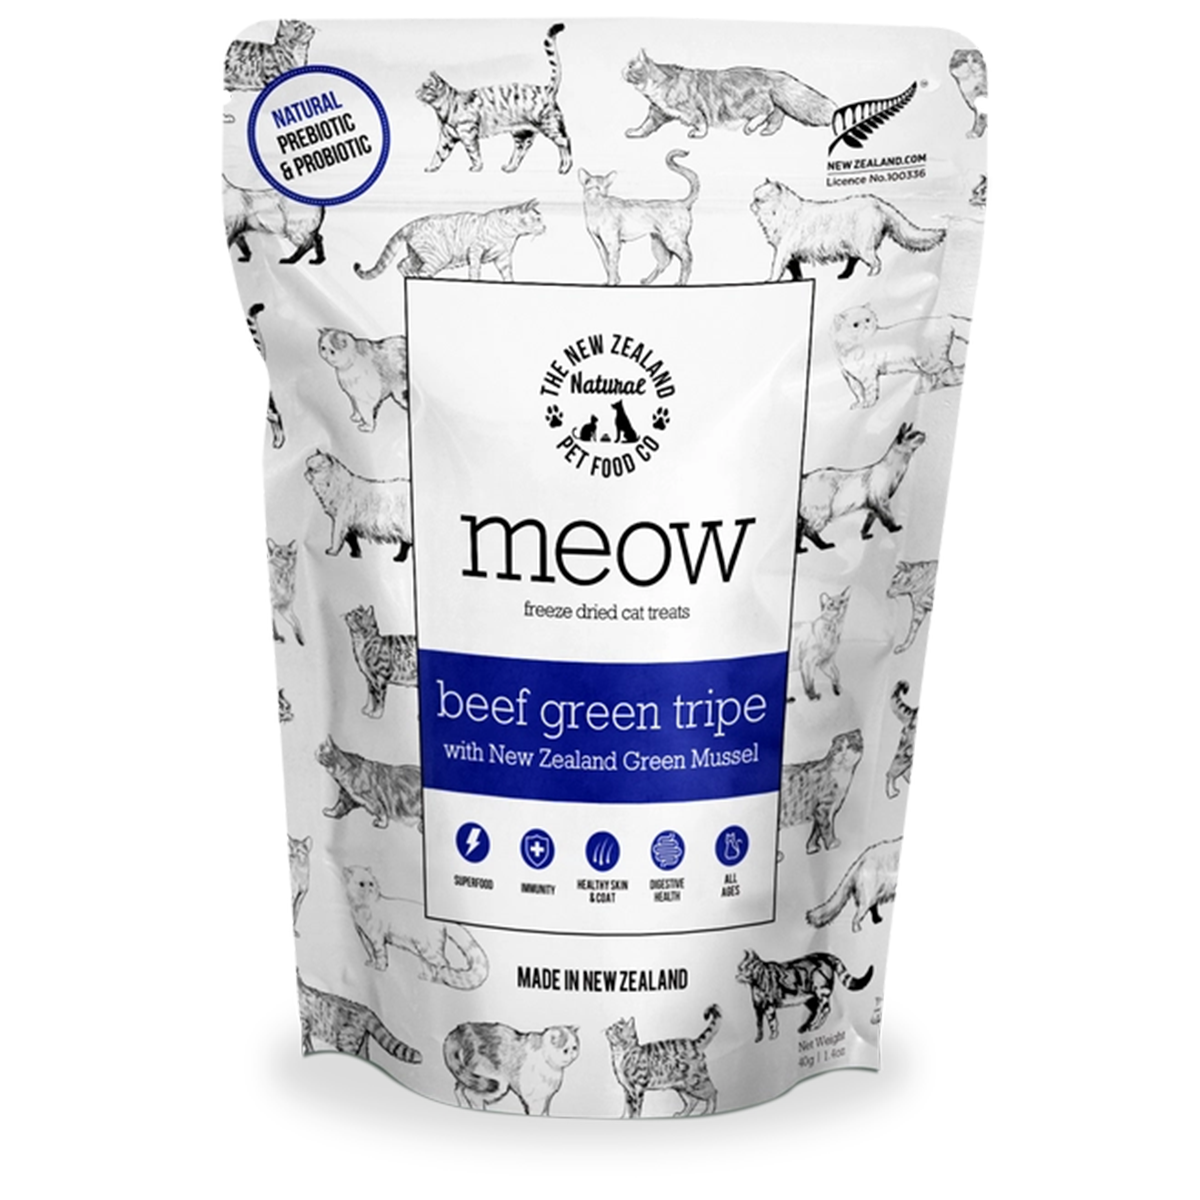 The New Zealand Natural Pet Food Co. Meow Freeze Dried Cat Treats - Beef Green Tripe